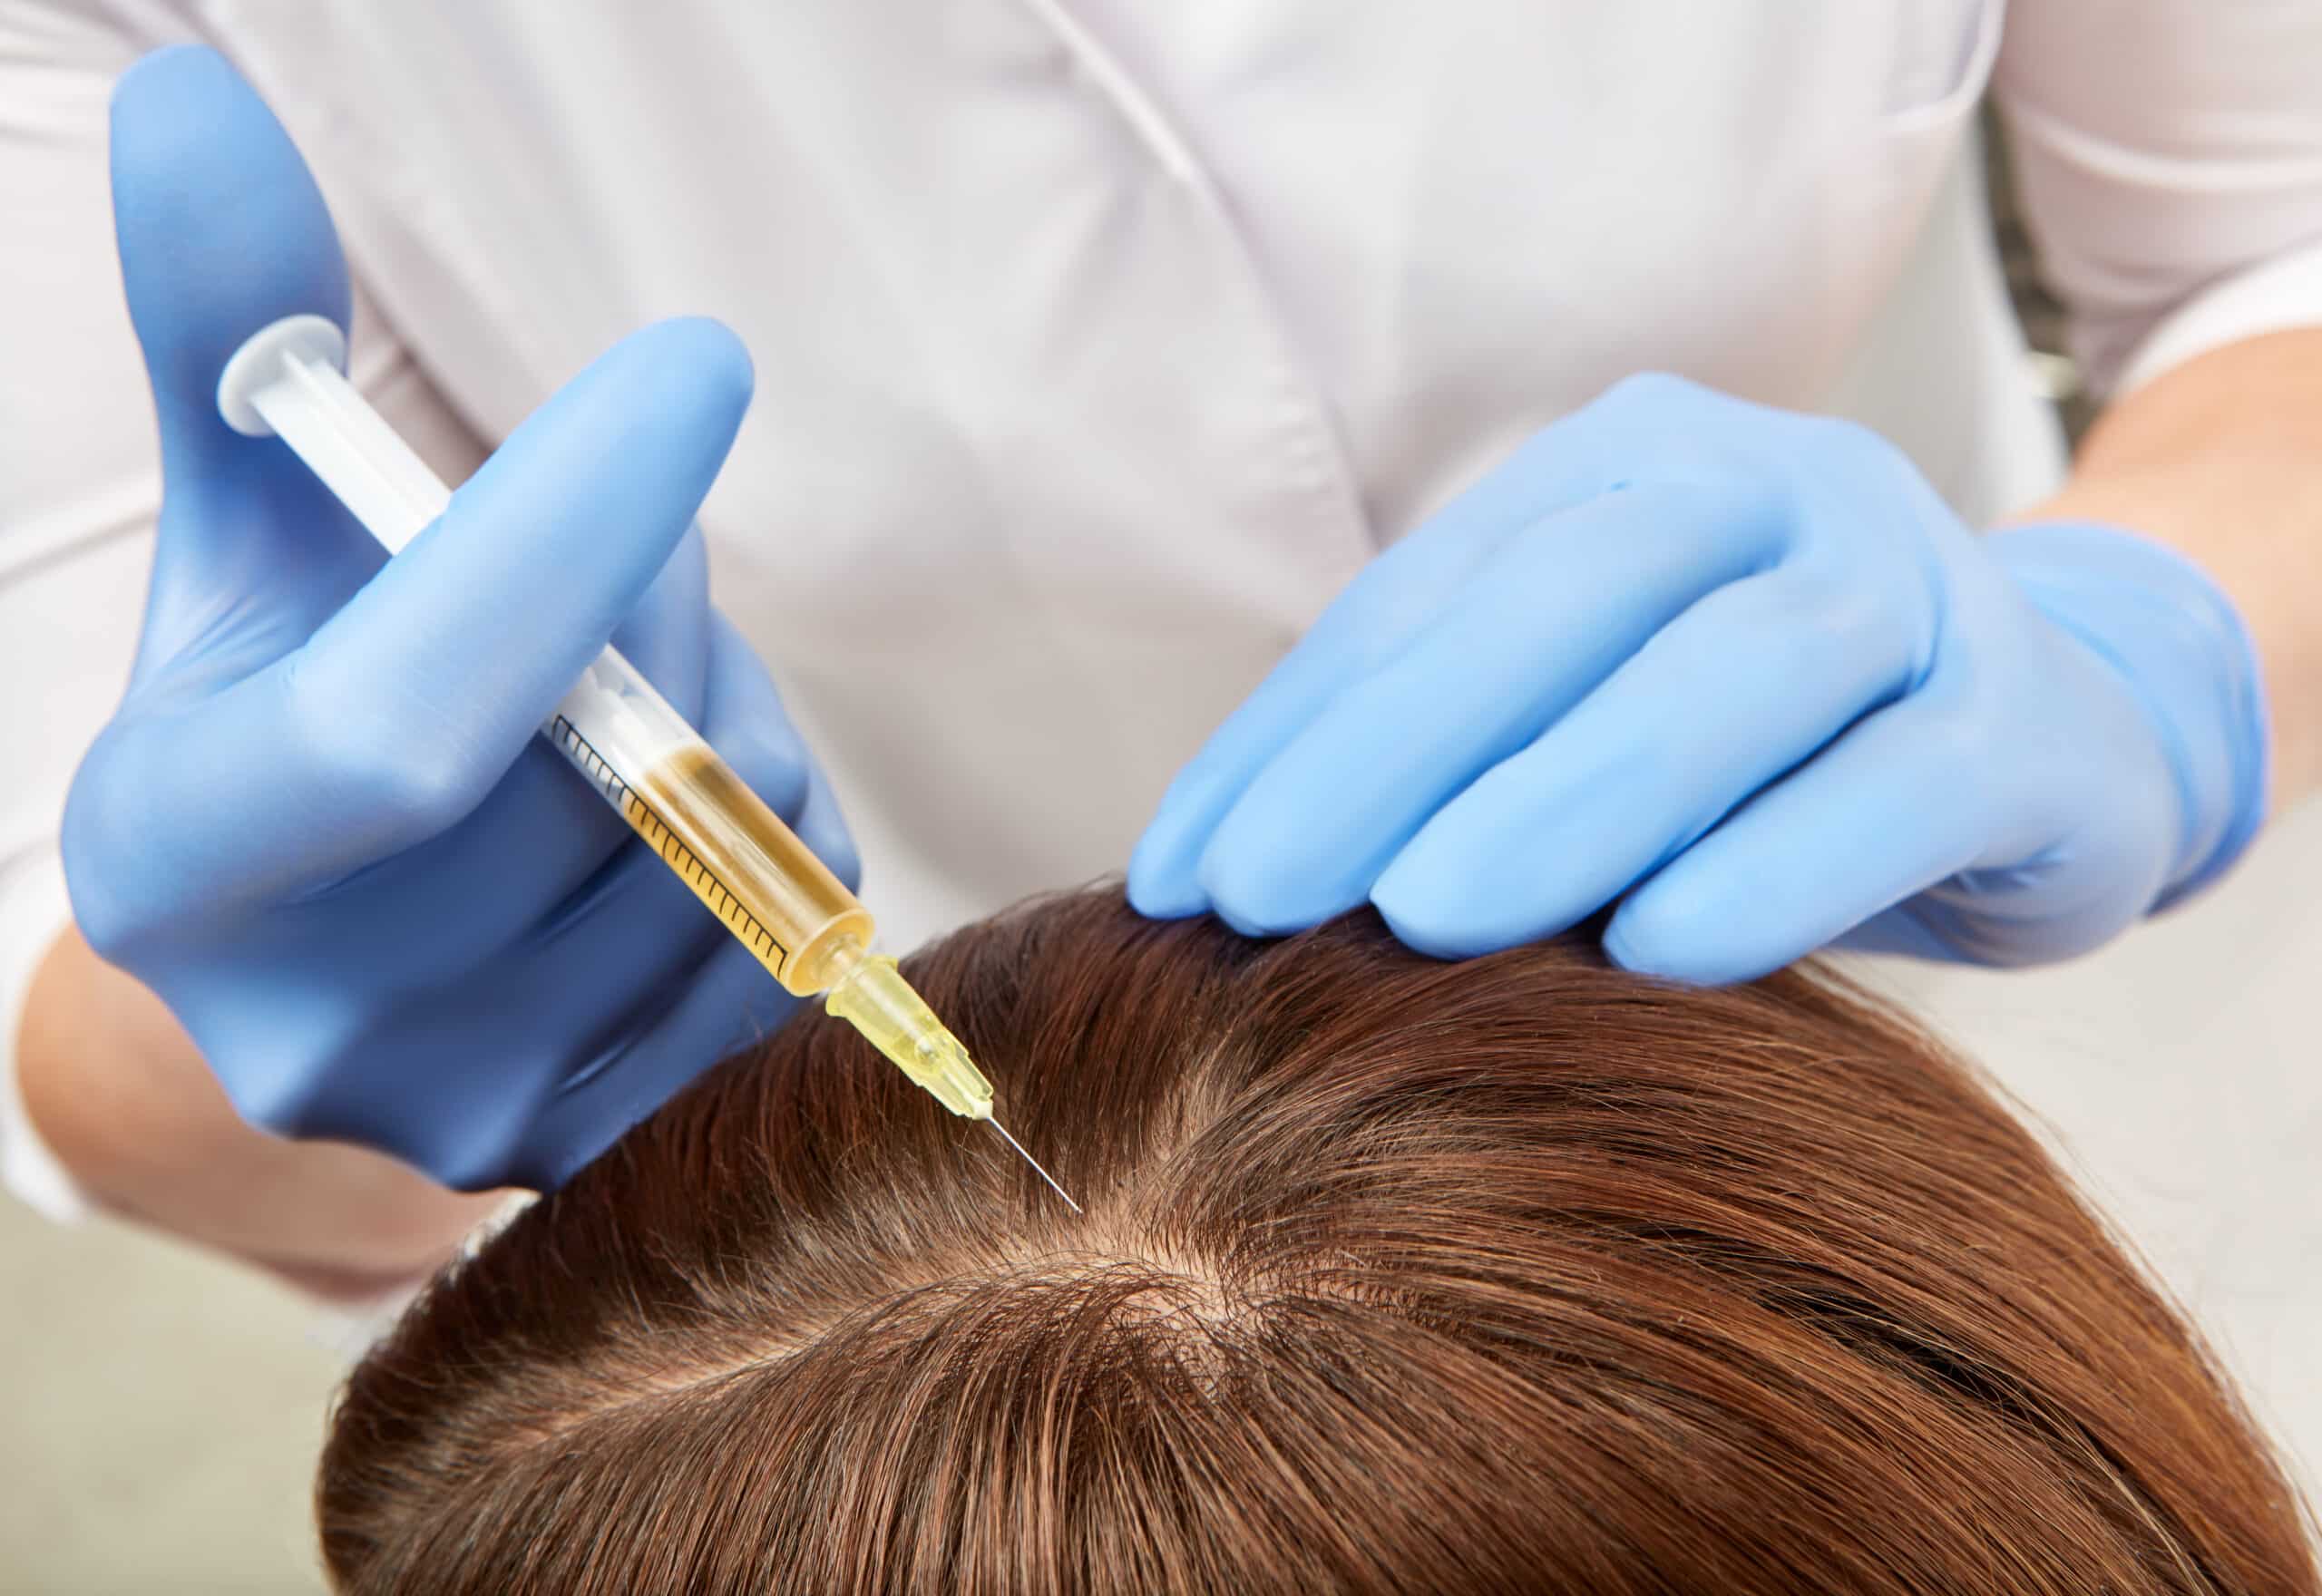 A medical provider administering prf hair loss treatment into the scalp via injection.